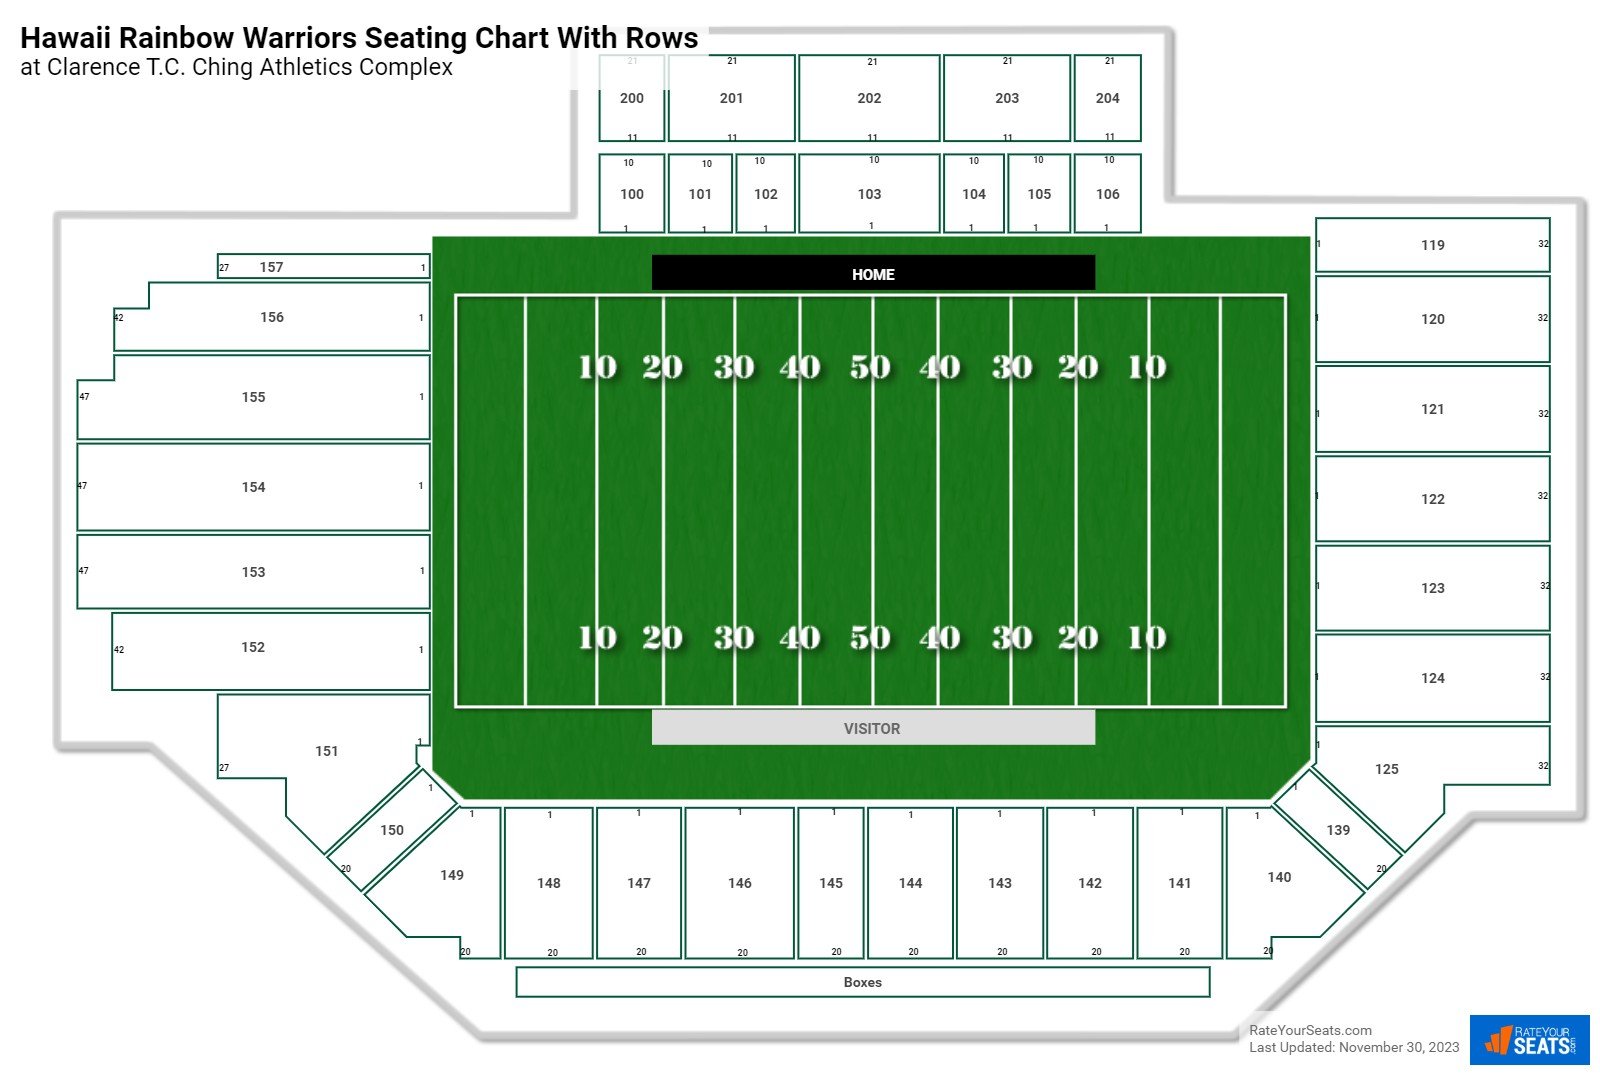 Clarence T.C. Ching Athletics Complex seating chart with row numbers